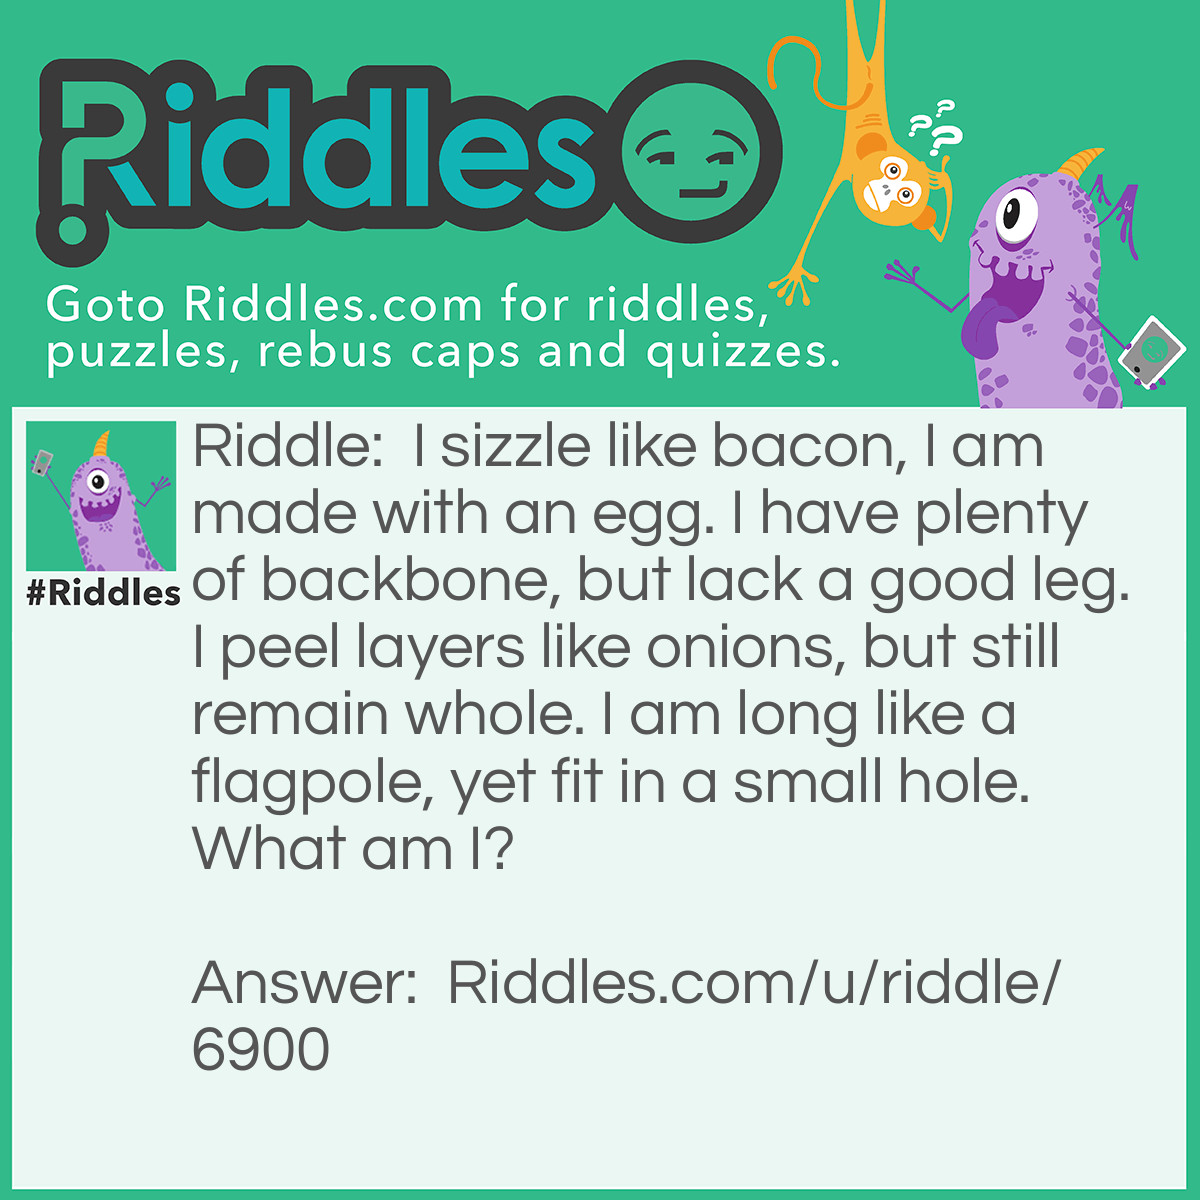 Riddle: I sizzle like bacon, I am made with an egg. I have plenty of backbone, but lack a good leg. I peel layers like onions, but still remain whole. I am long like a flagpole, yet fit in a small hole. What am I? Answer: I be a snake